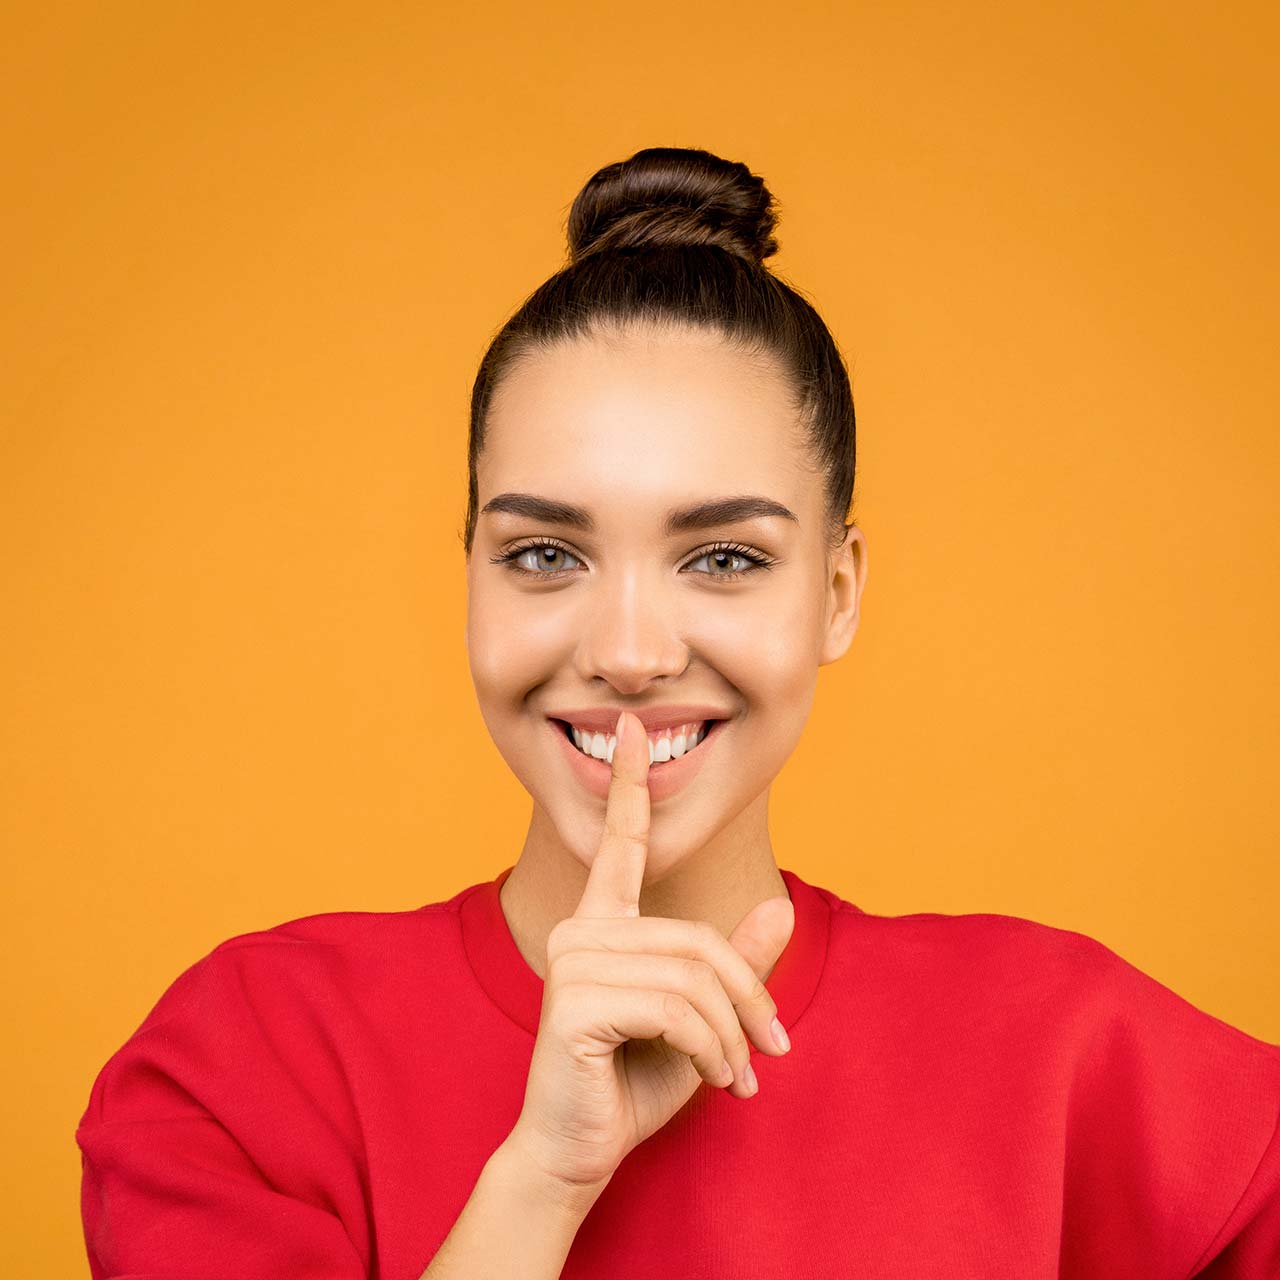 Photo of a smiling woman holding her index finger to her lips